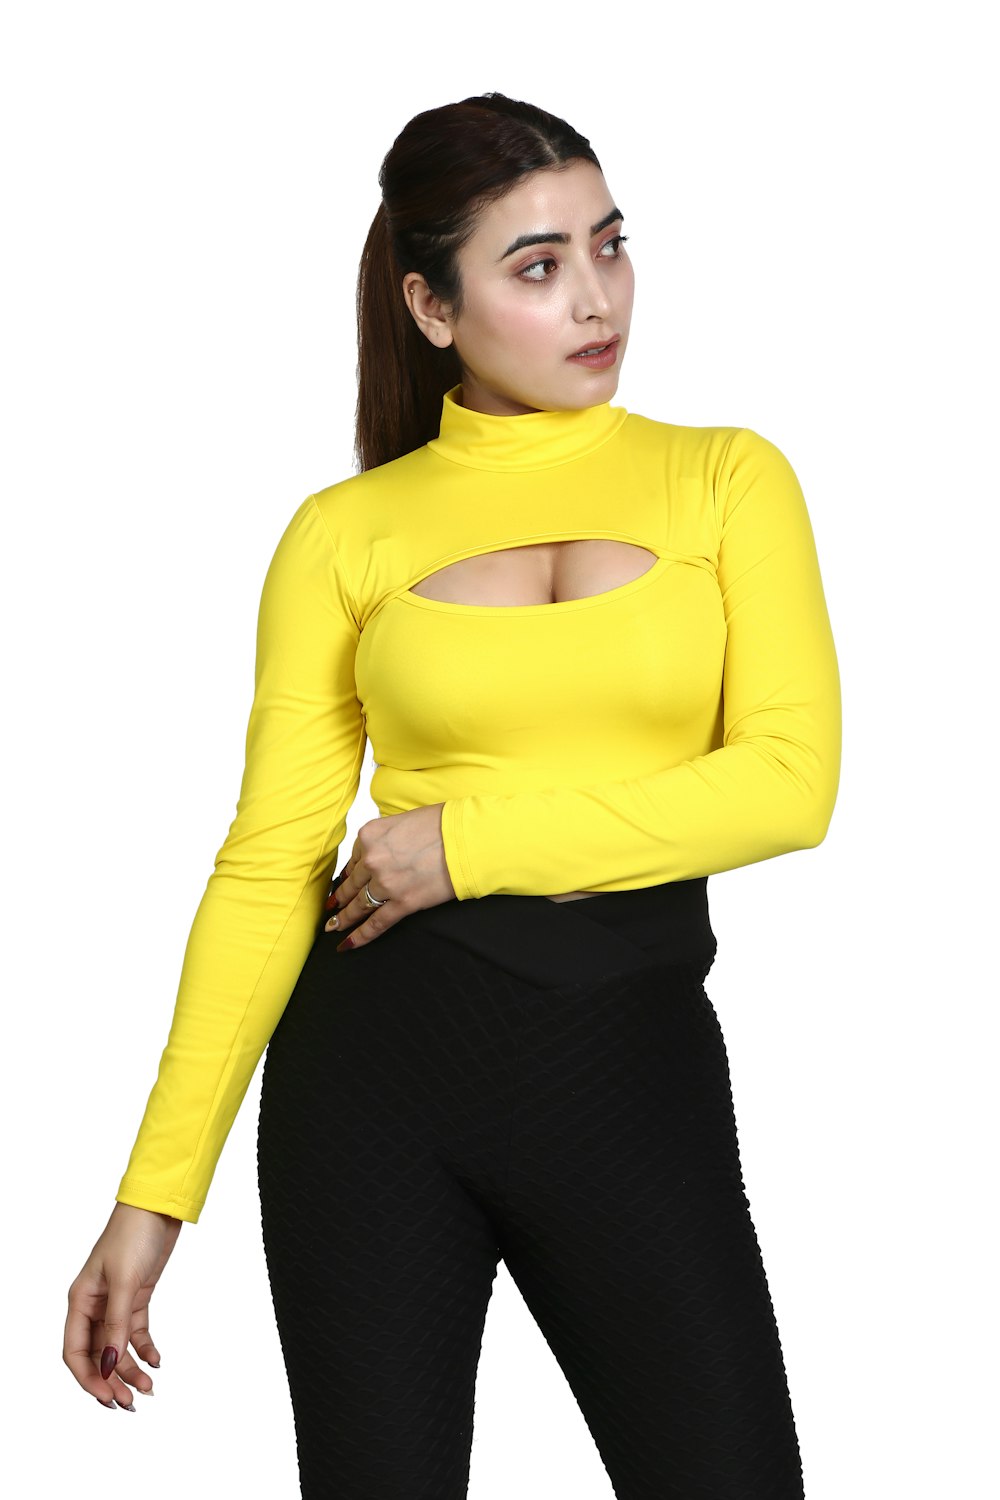 a woman wearing a yellow top and black pants